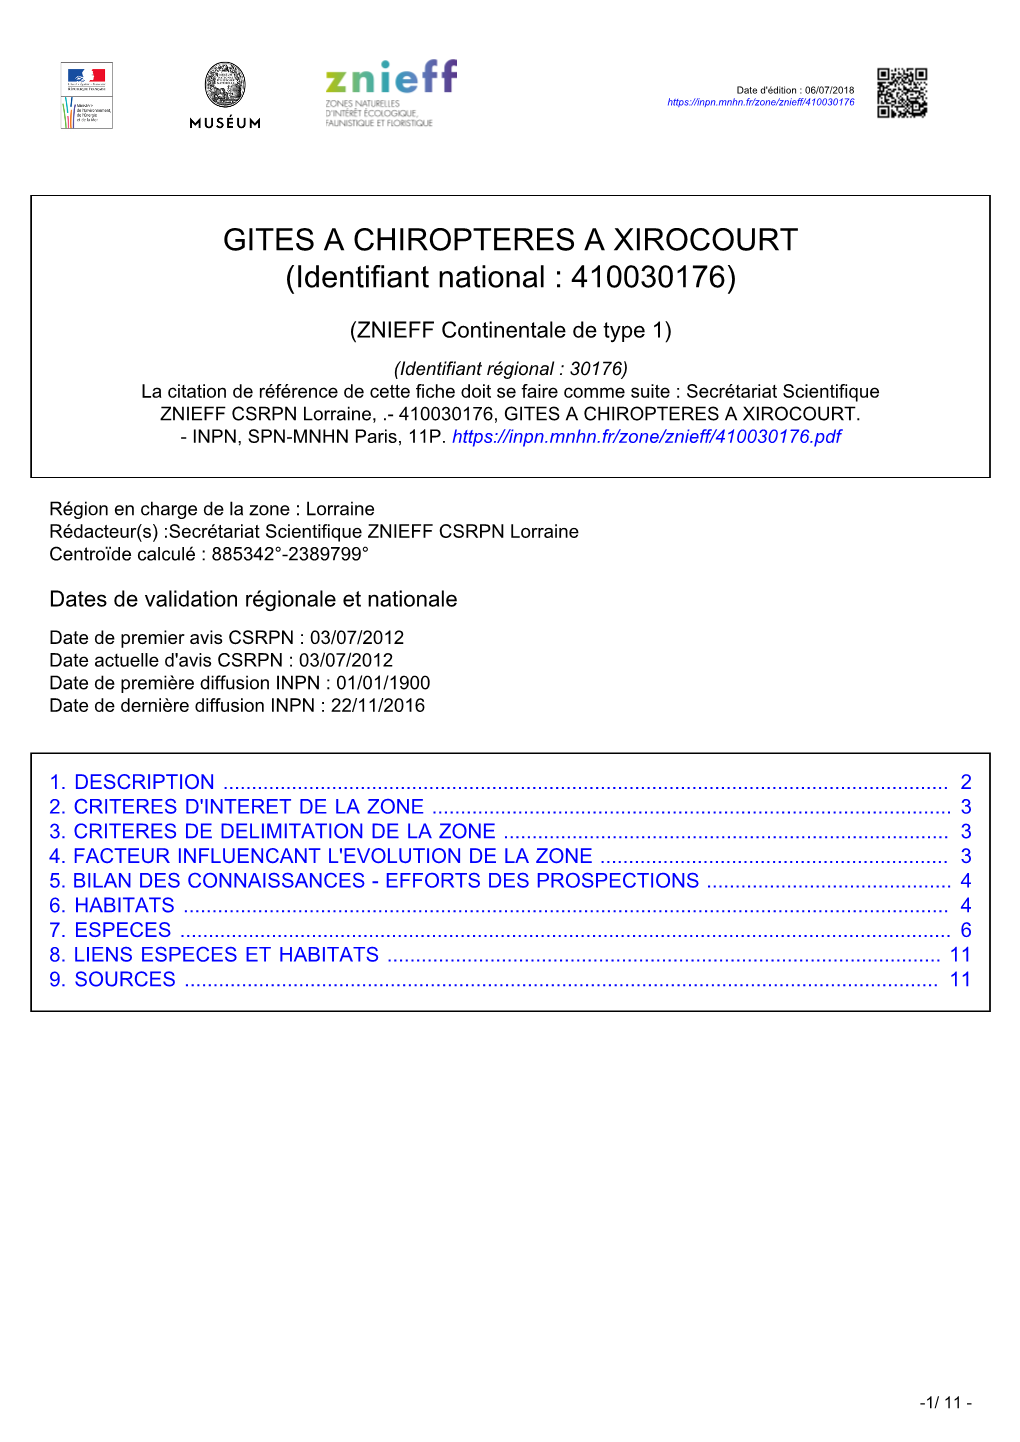 GITES a CHIROPTERES a XIROCOURT (Identifiant National : 410030176)